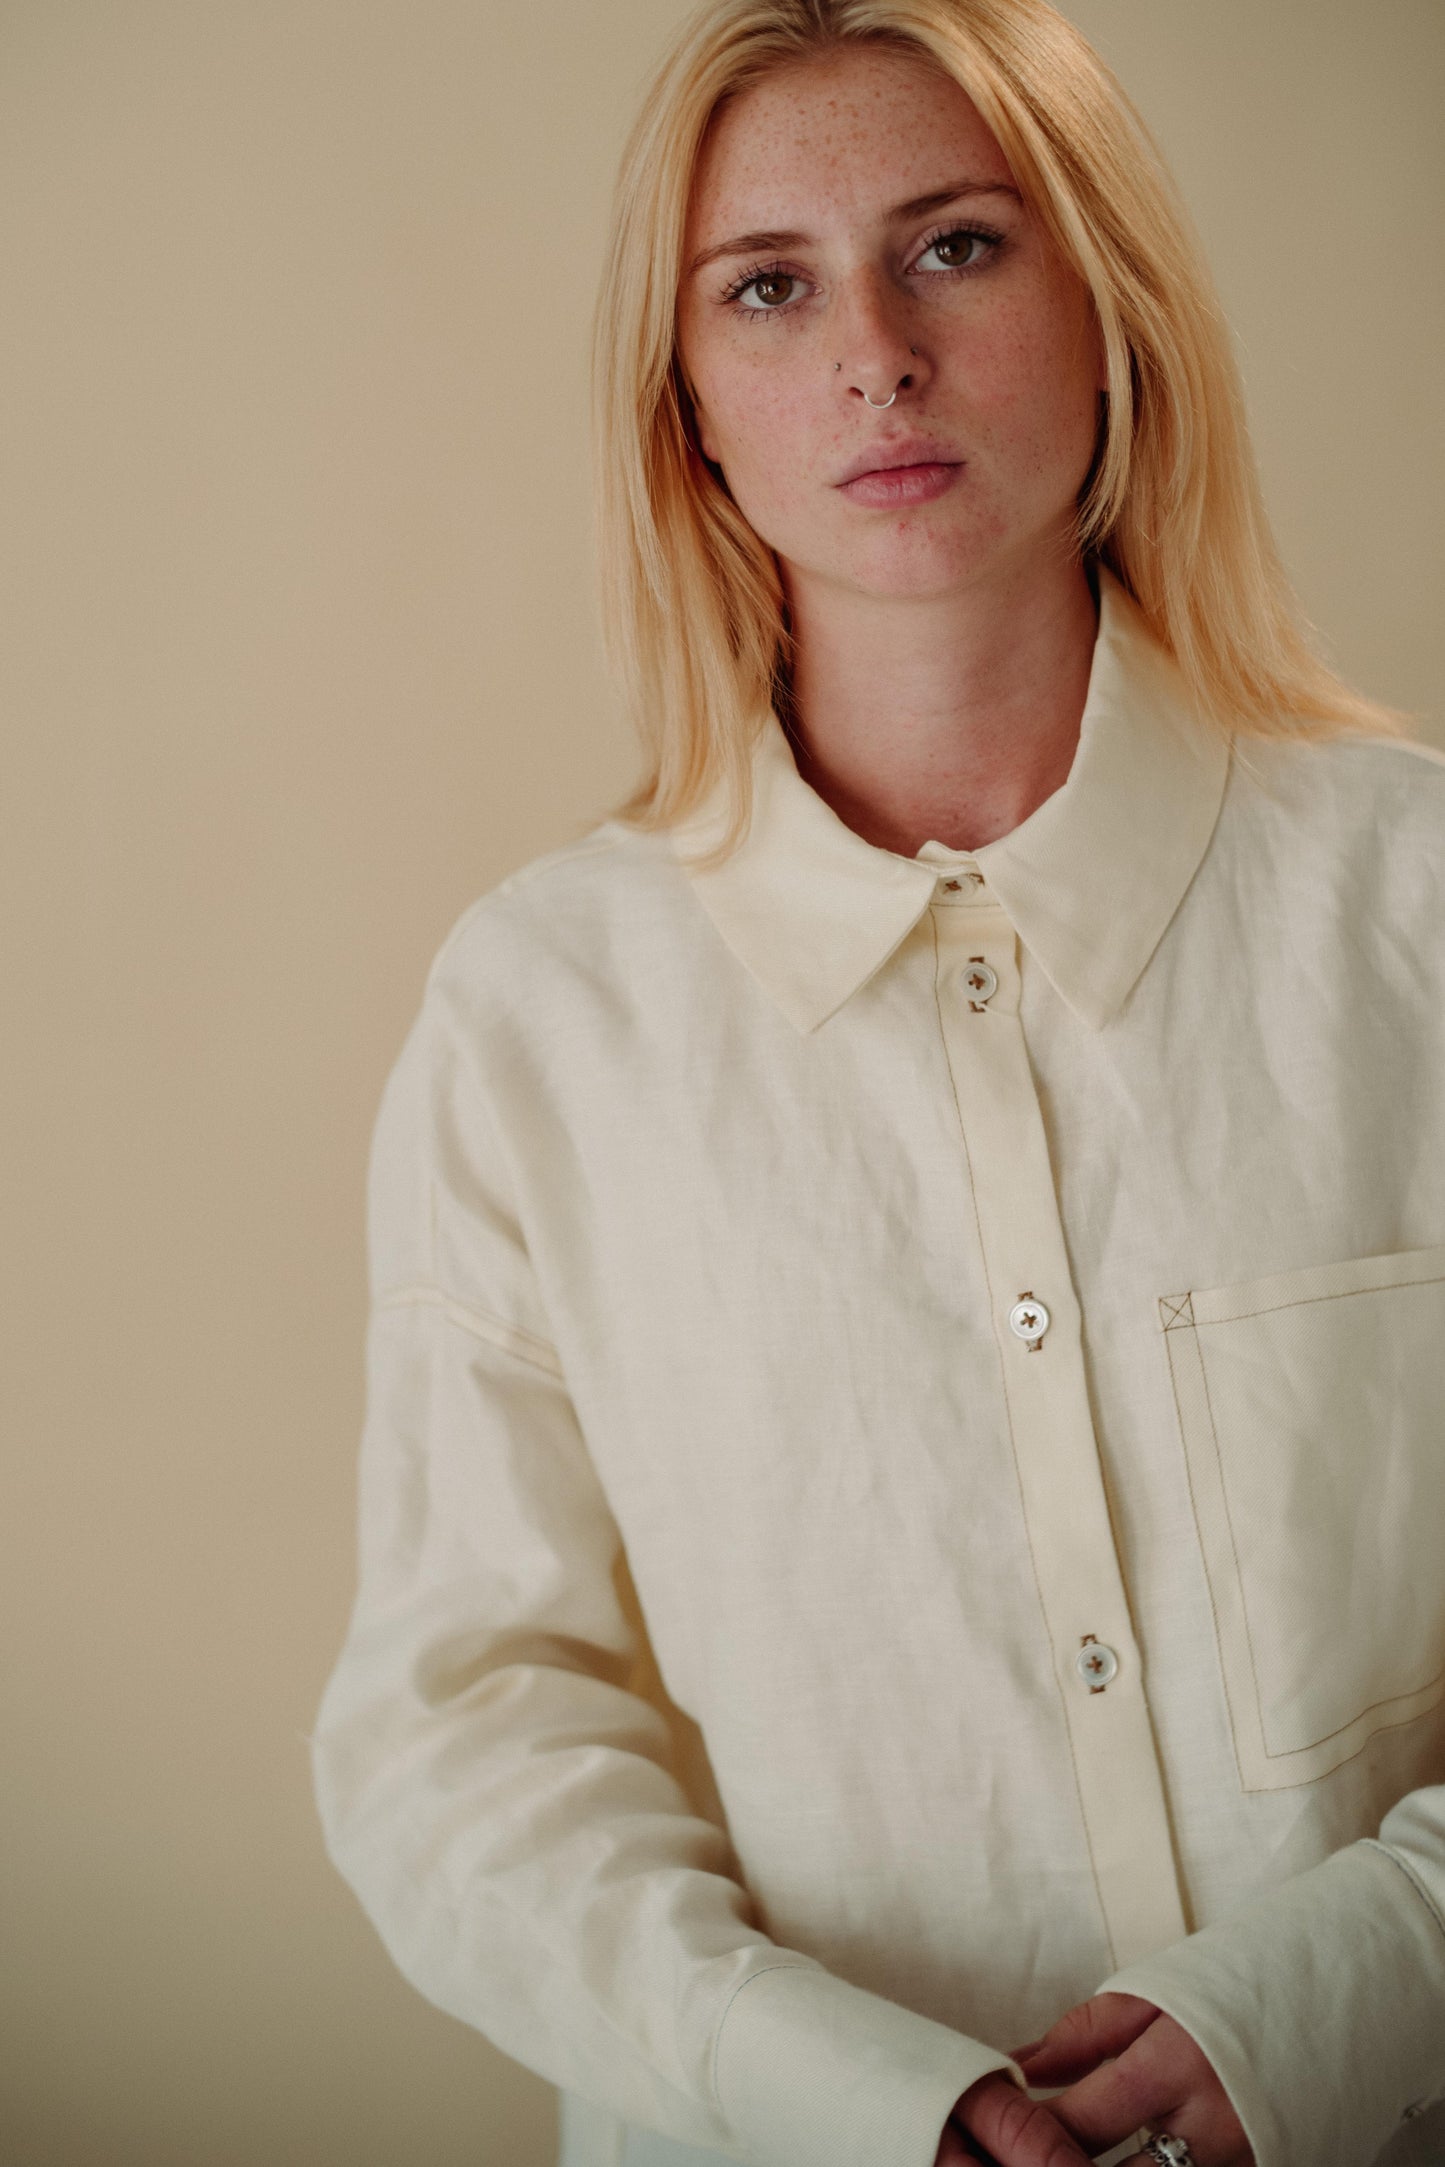 DAD SHIRT | ECRU TWILL | The Dad shirt- inspried by one of Amy's favourite oversized shirts, poached from her Dad's wardrobe! The shape of the shirt has been carefully considered - a longer length, oversized pocket, collar and cuff details make this a war